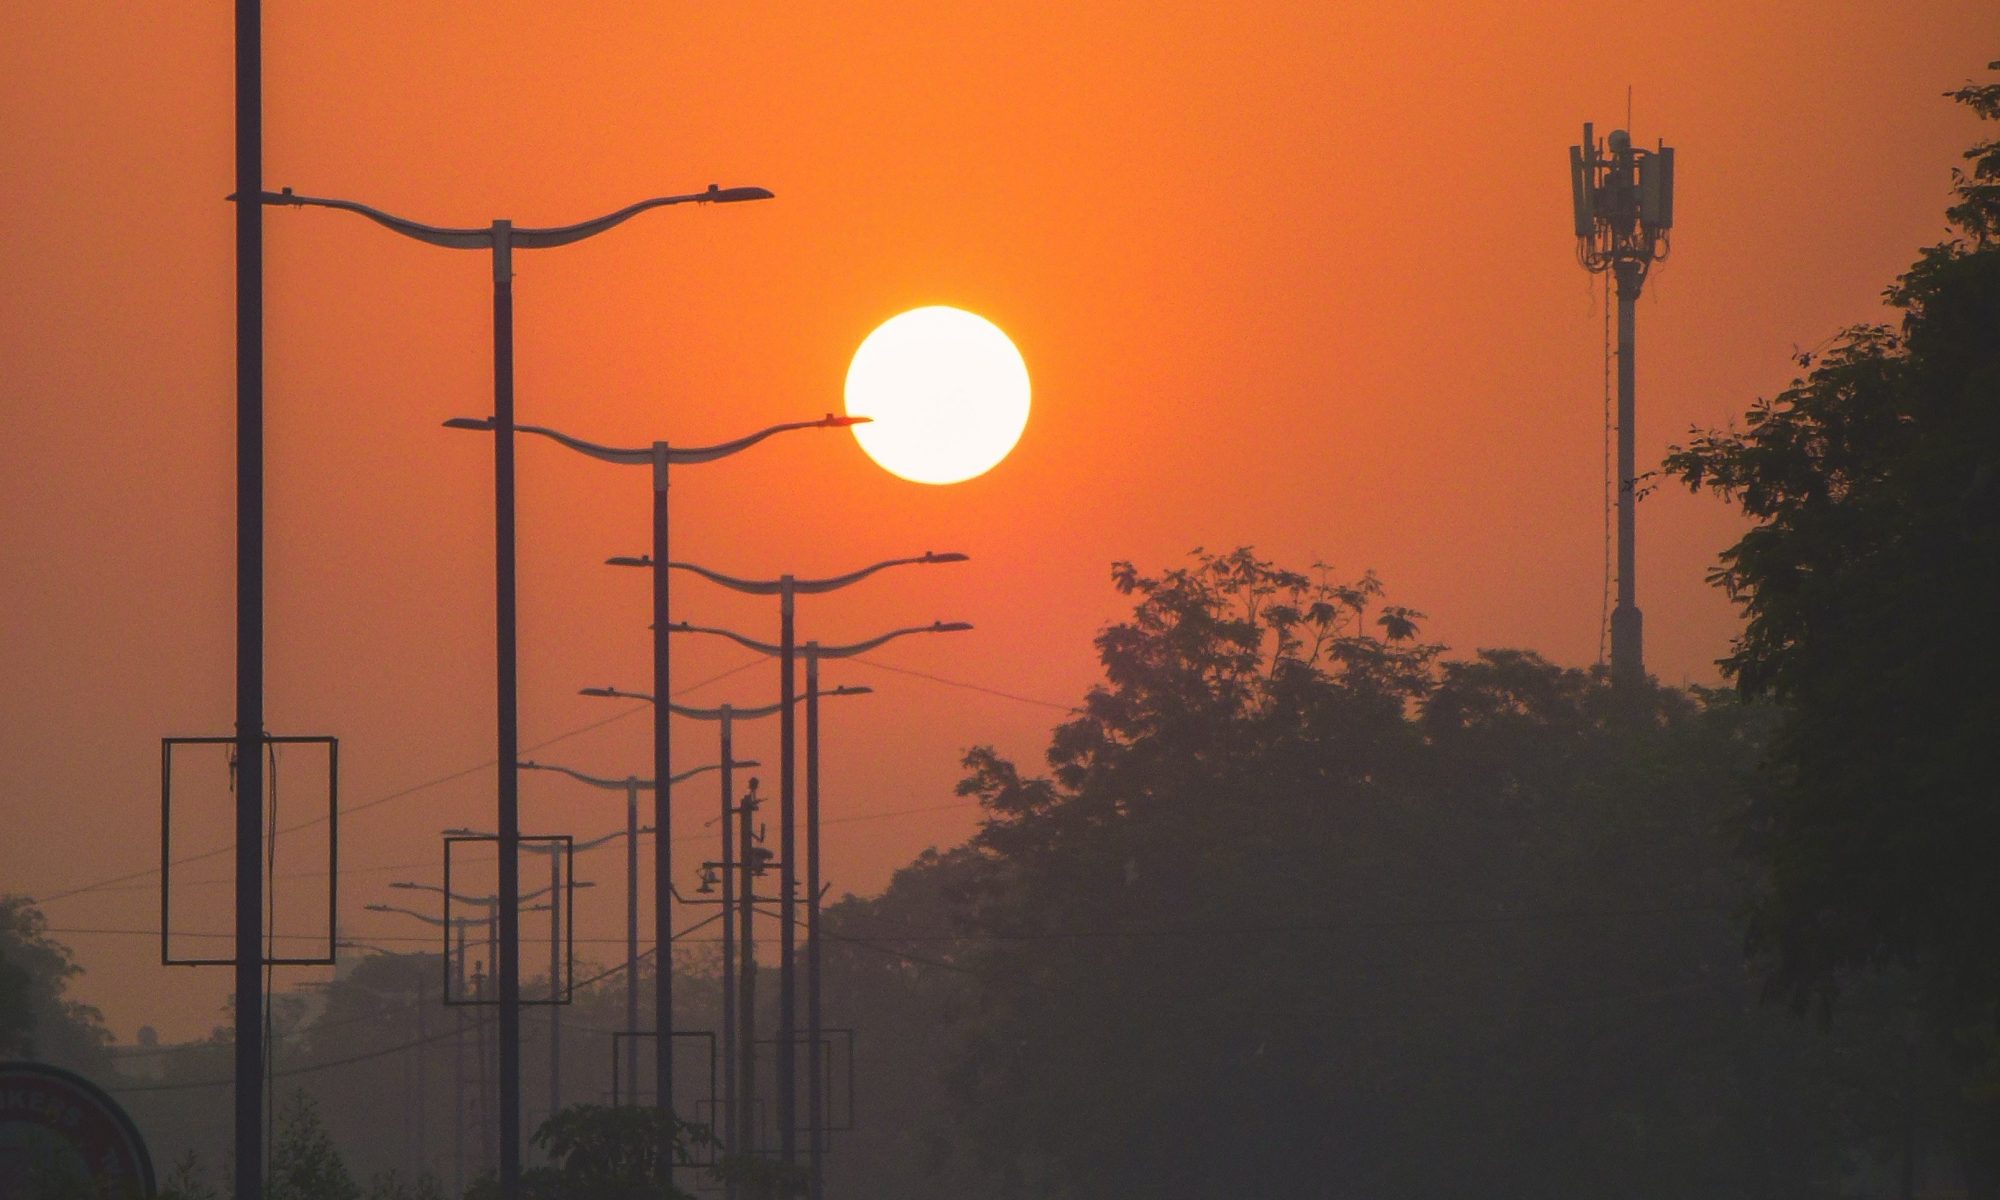 street lamps lining the street in India at sundown